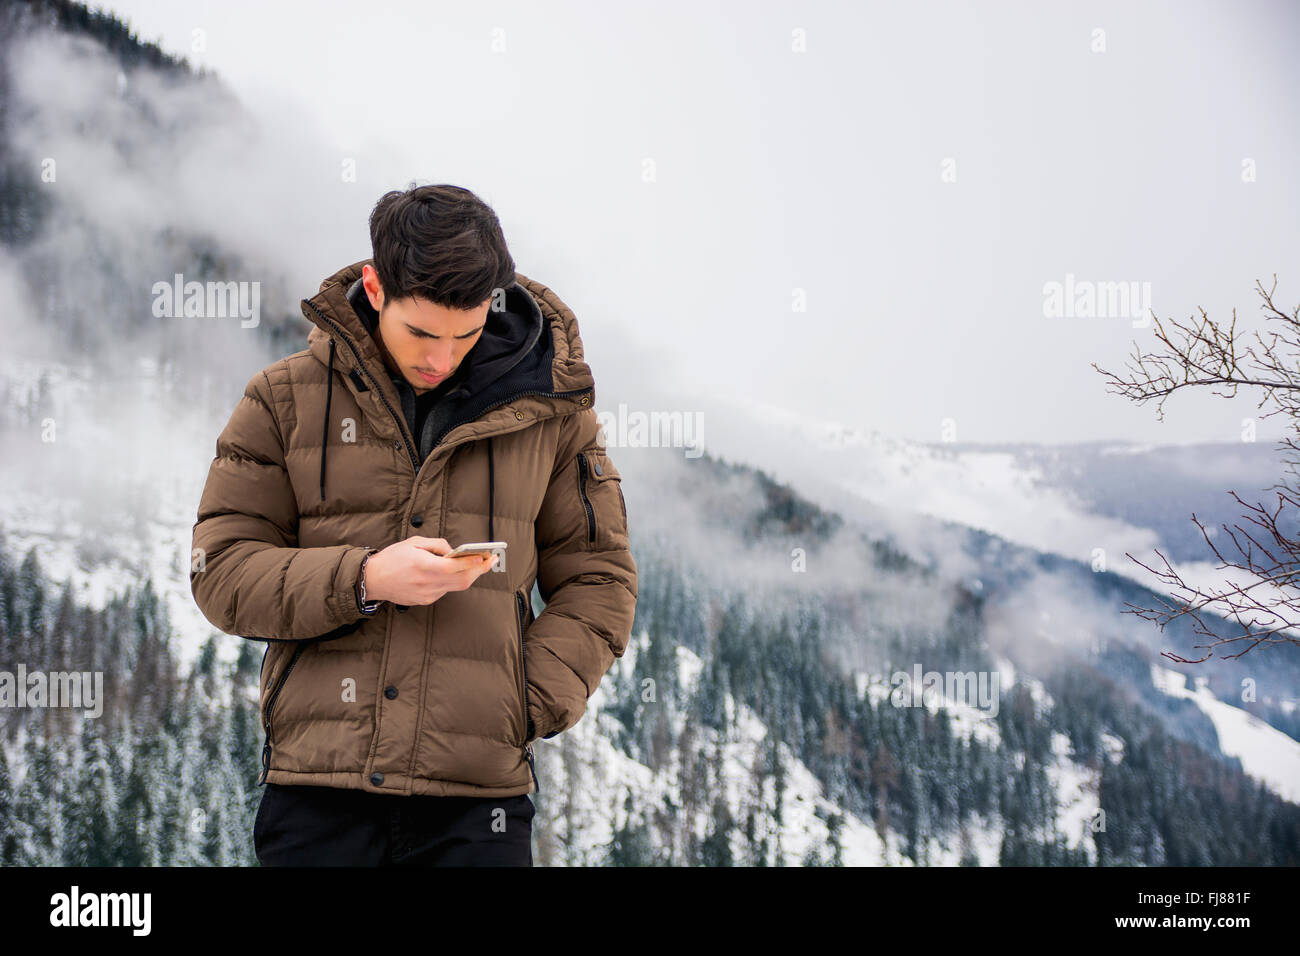 Dark haired handsome young man in winter outerwear using cell phone or smartphone, outdoor at mountain with snowy landscape behi Stock Photo